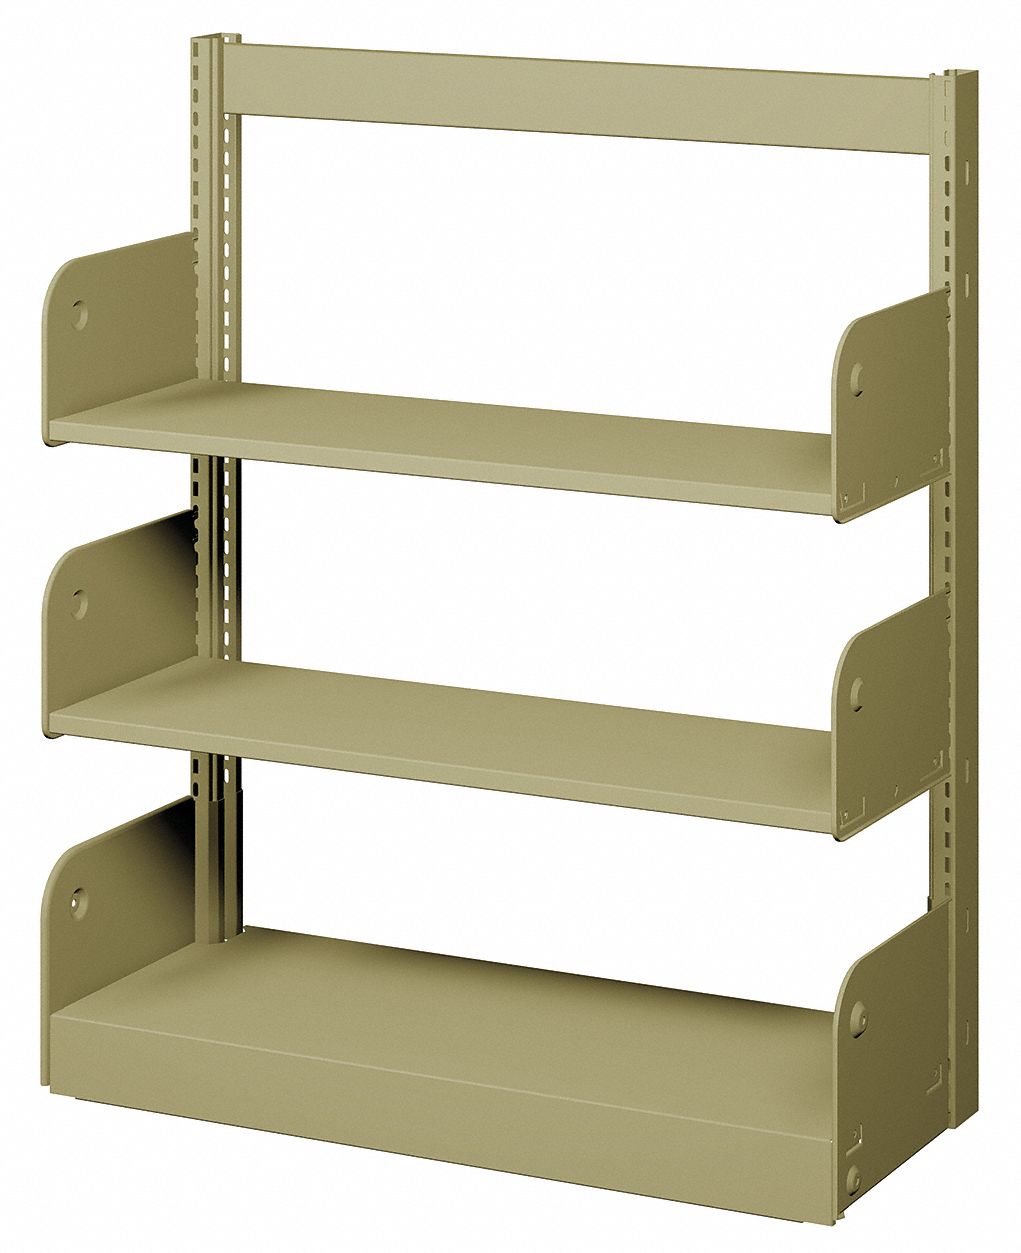 Flat Library Shelving: Single Face Starter, 3 Shelves, 42 in Ht, 36 in Wd, 10 in Nominal